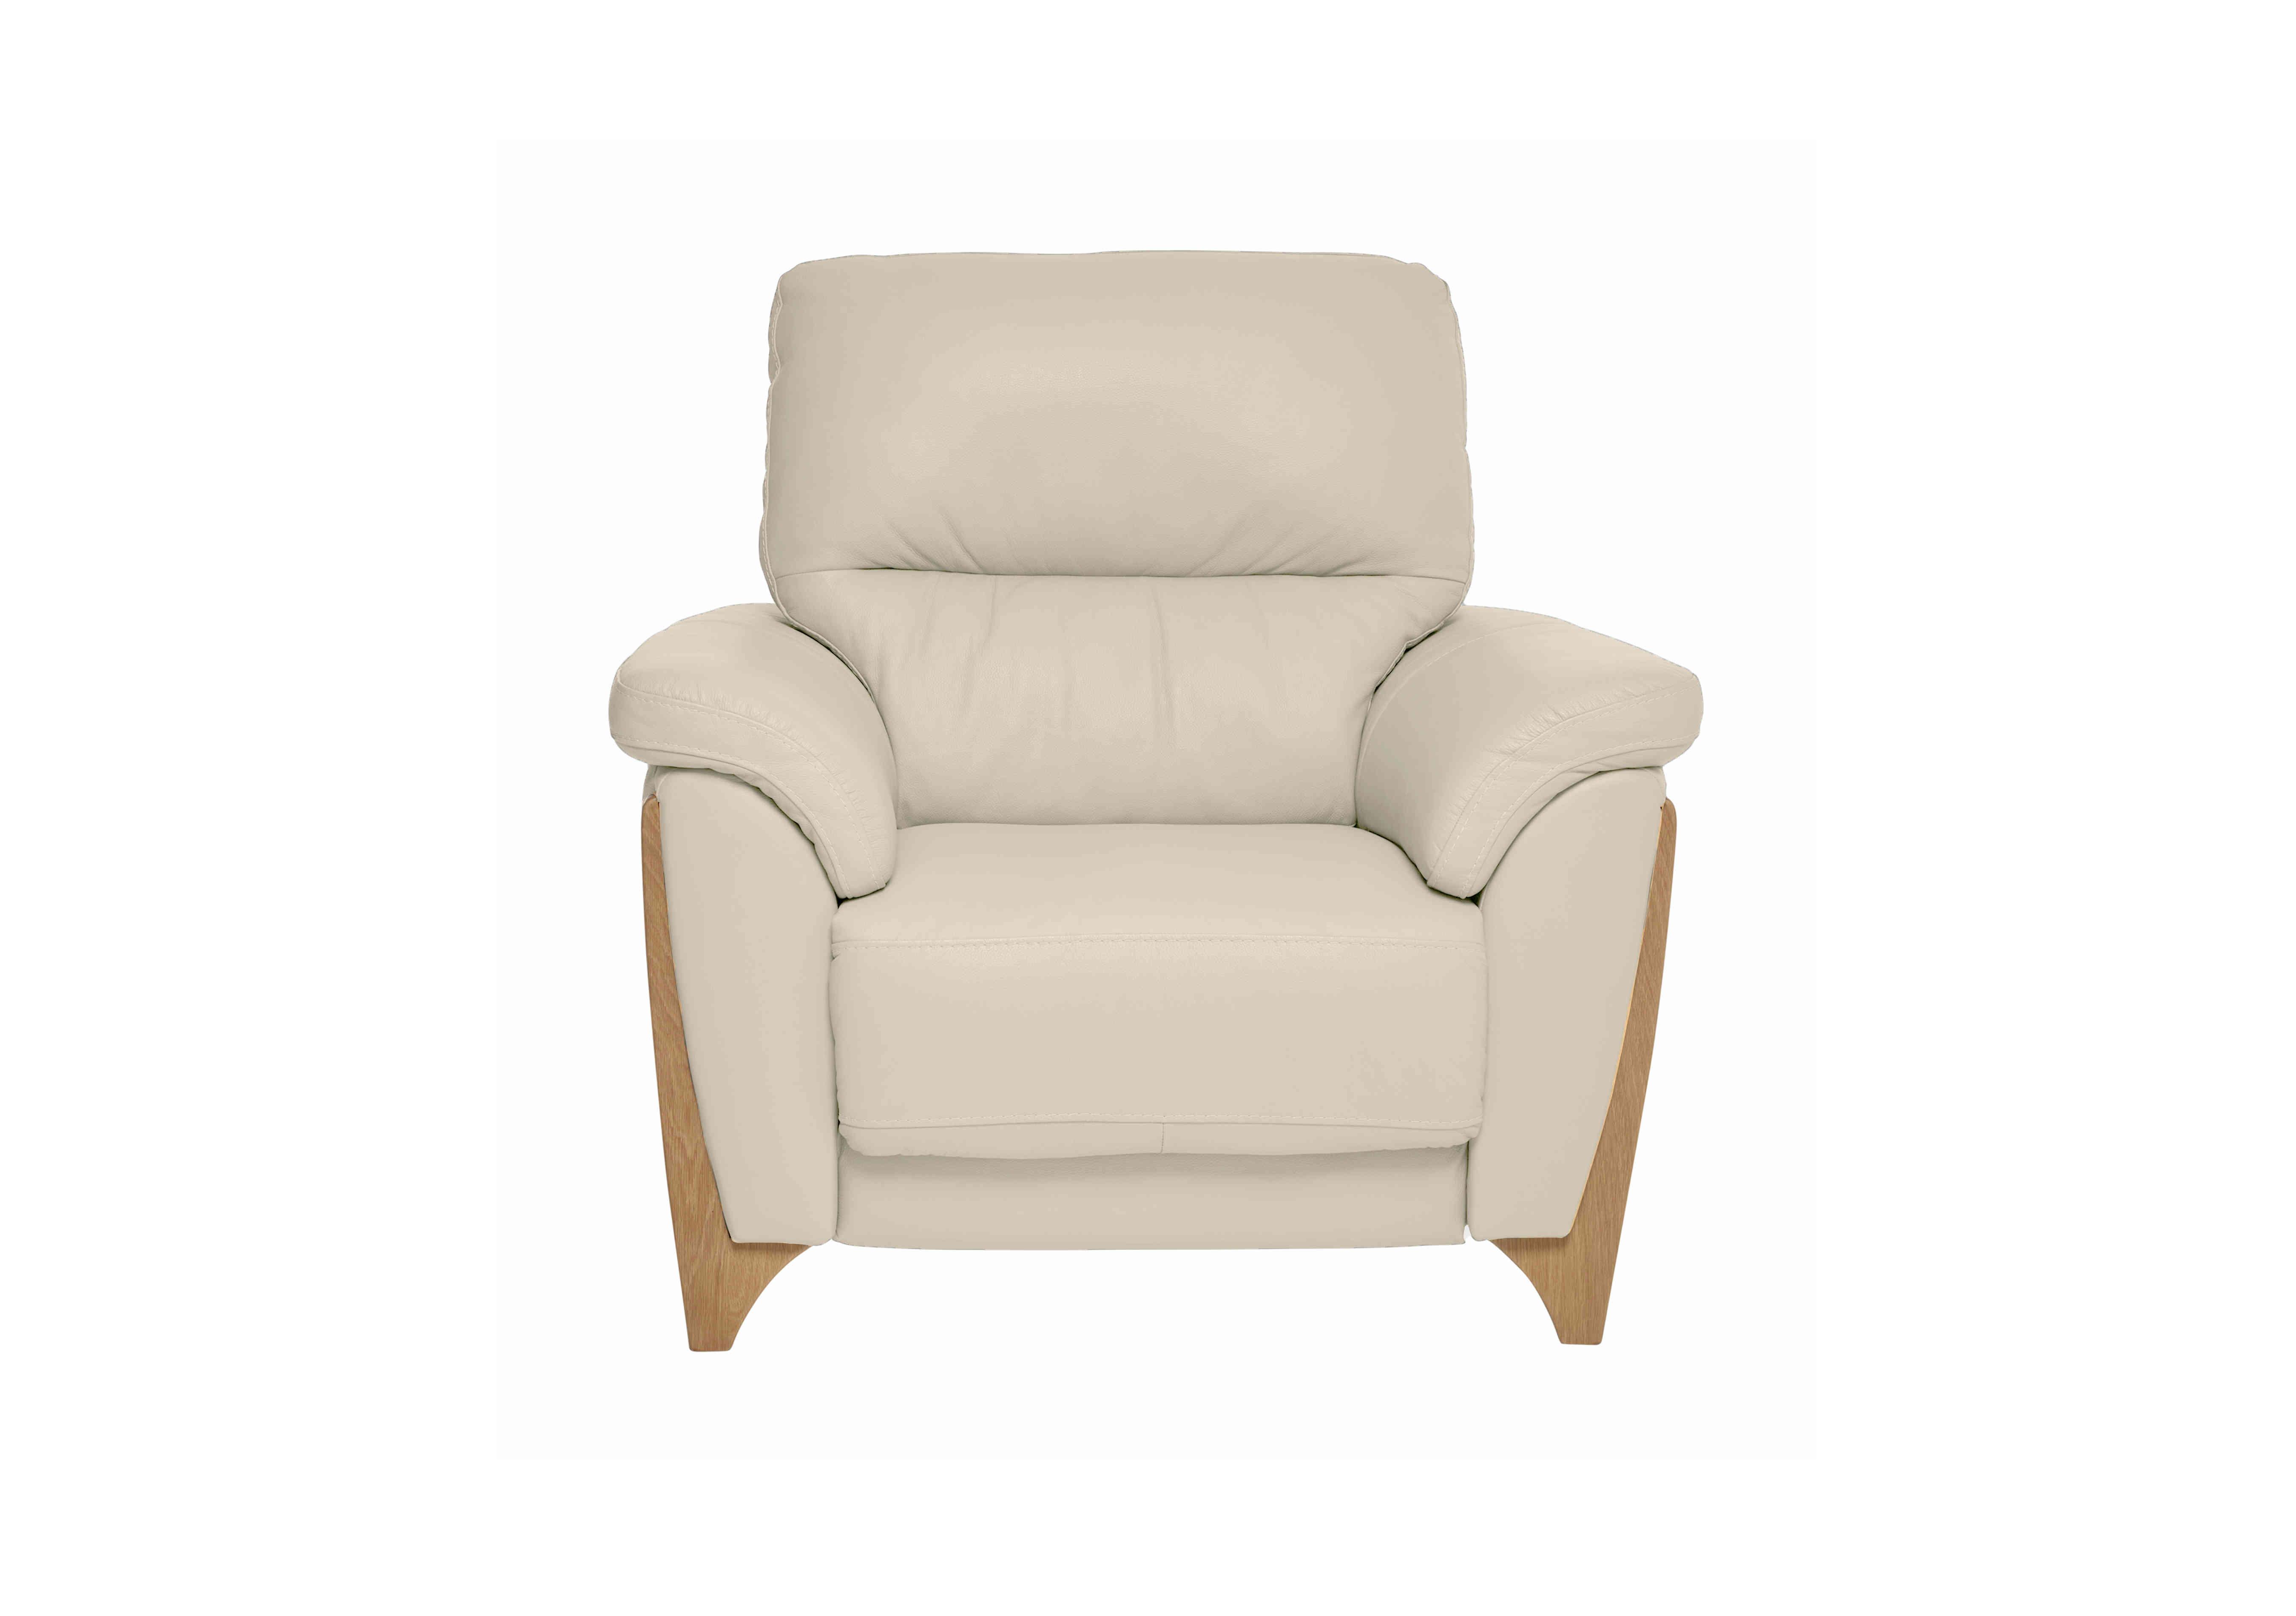 Enna Leather Power Recliner Armchair in L904 on Furniture Village